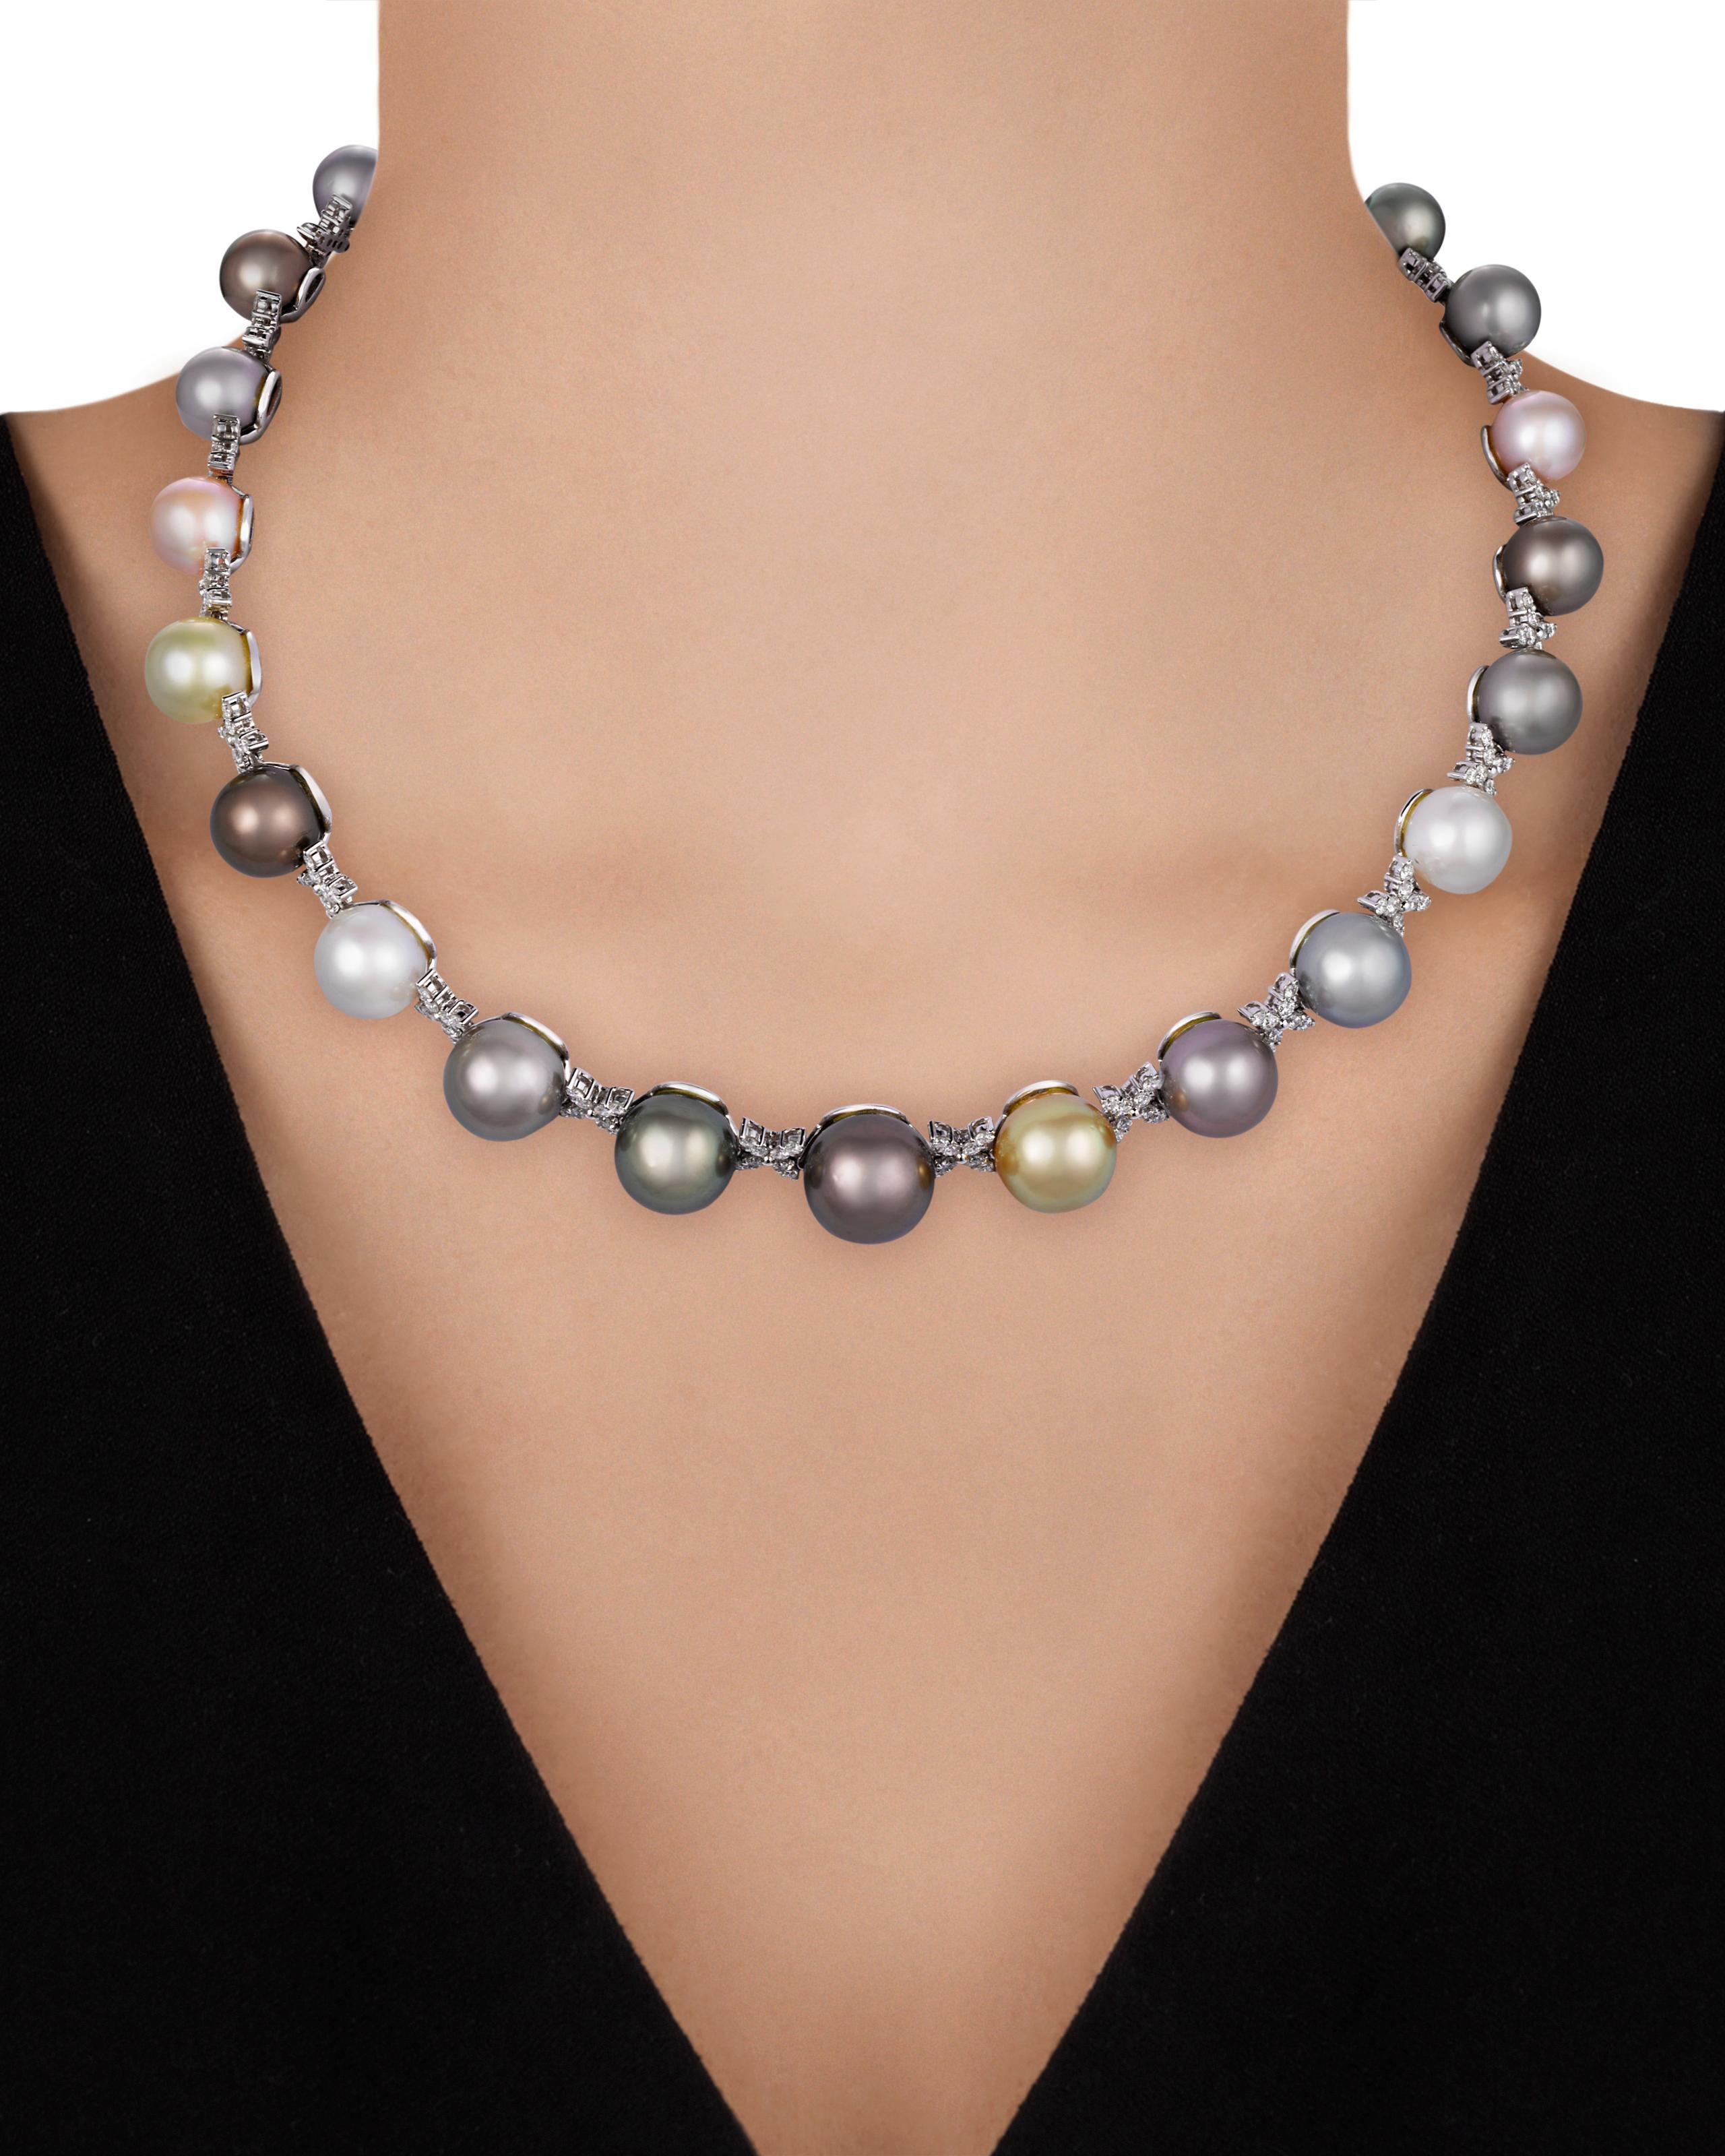 Outstanding in quality and design, this single strand of pearls exhibits a wide array of colors. Displaying hues ranging from lustrous white and shades of gray to deep black and vibrant golds, these large pearls radiate from within. Each of the 14